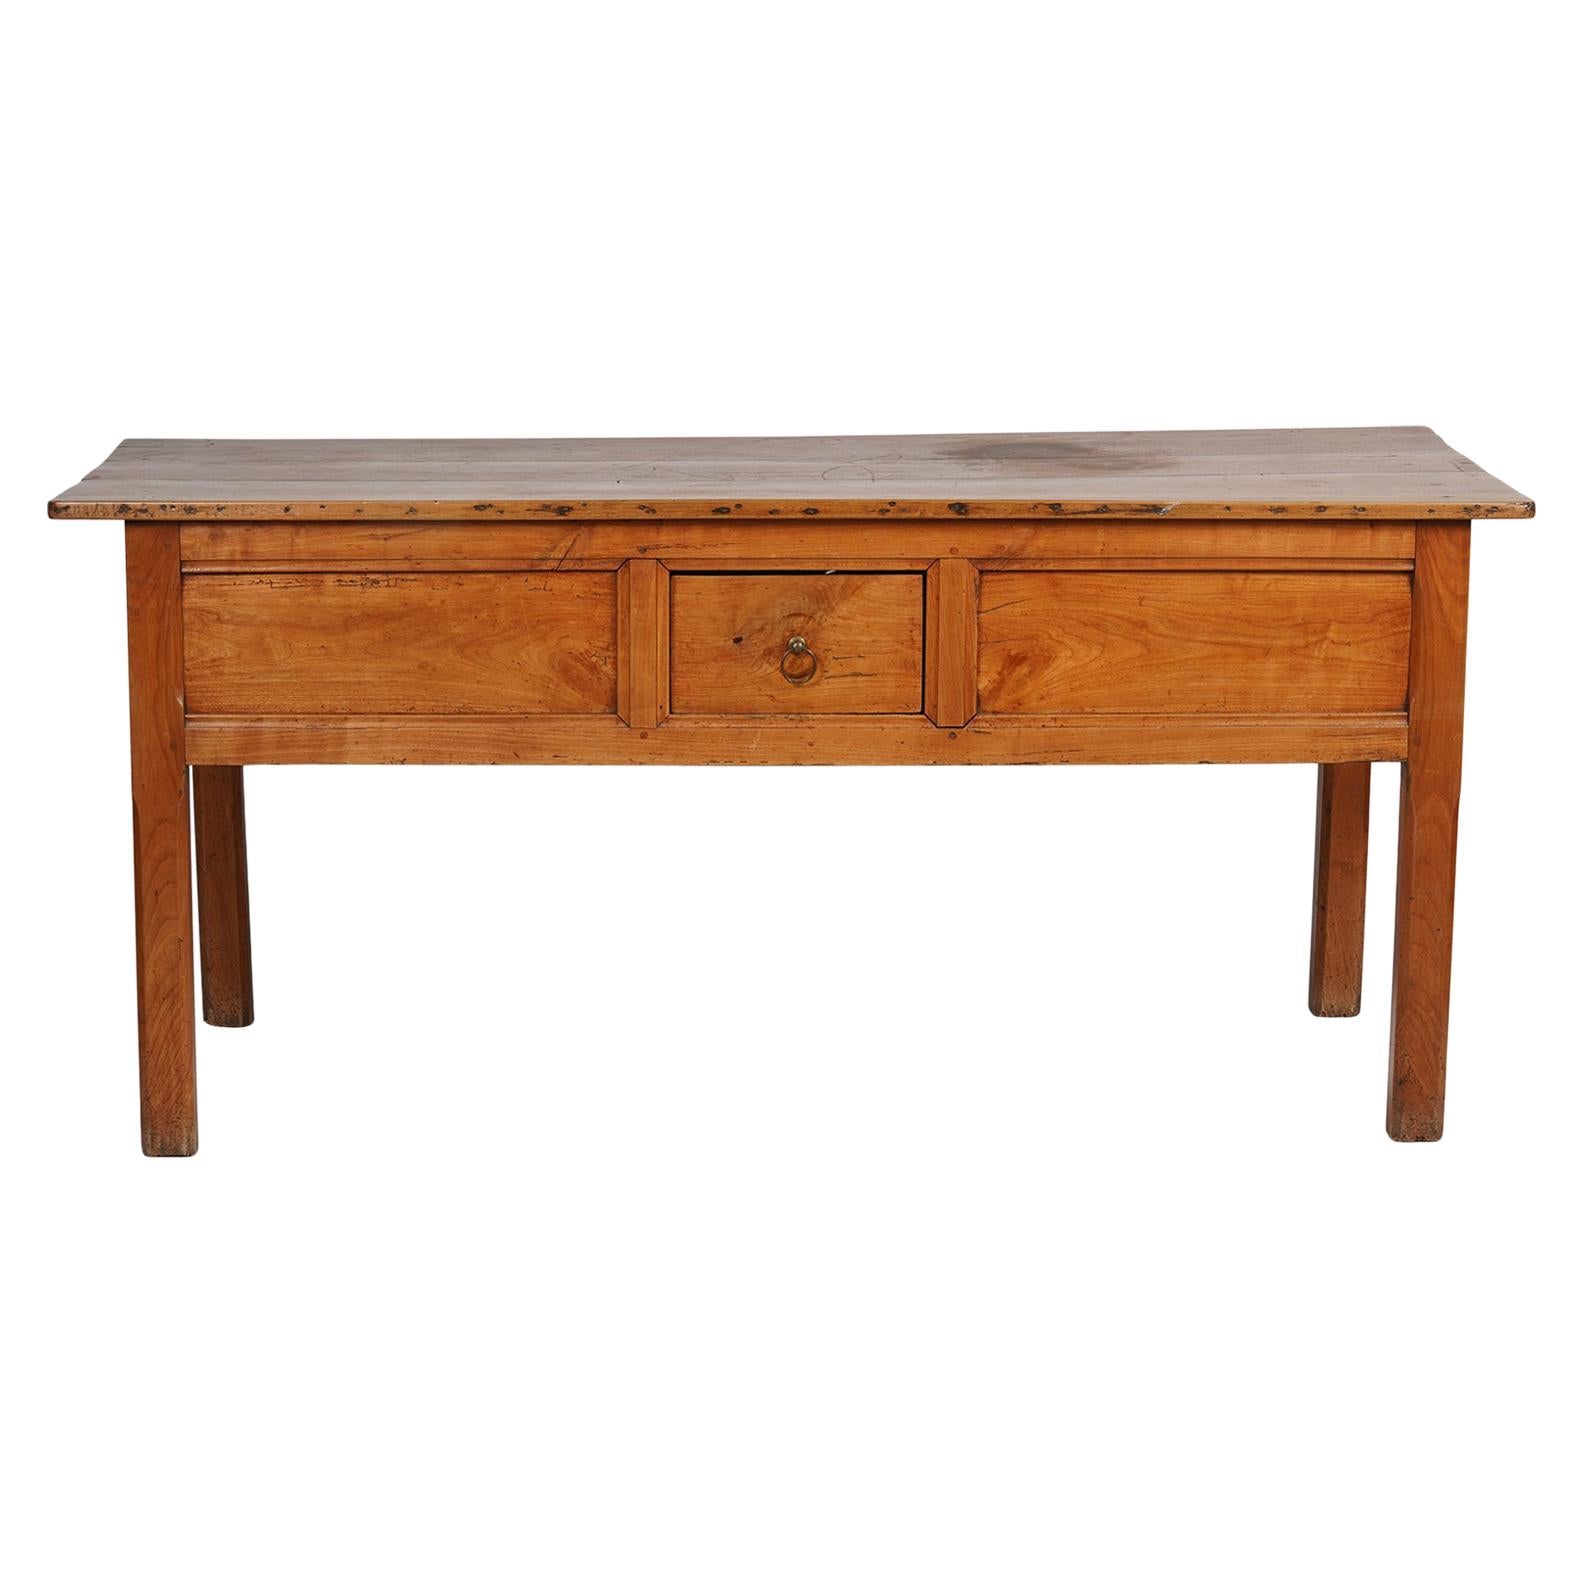 French Provincial Fruitwood Three-Drawer Work Table, circa 1830